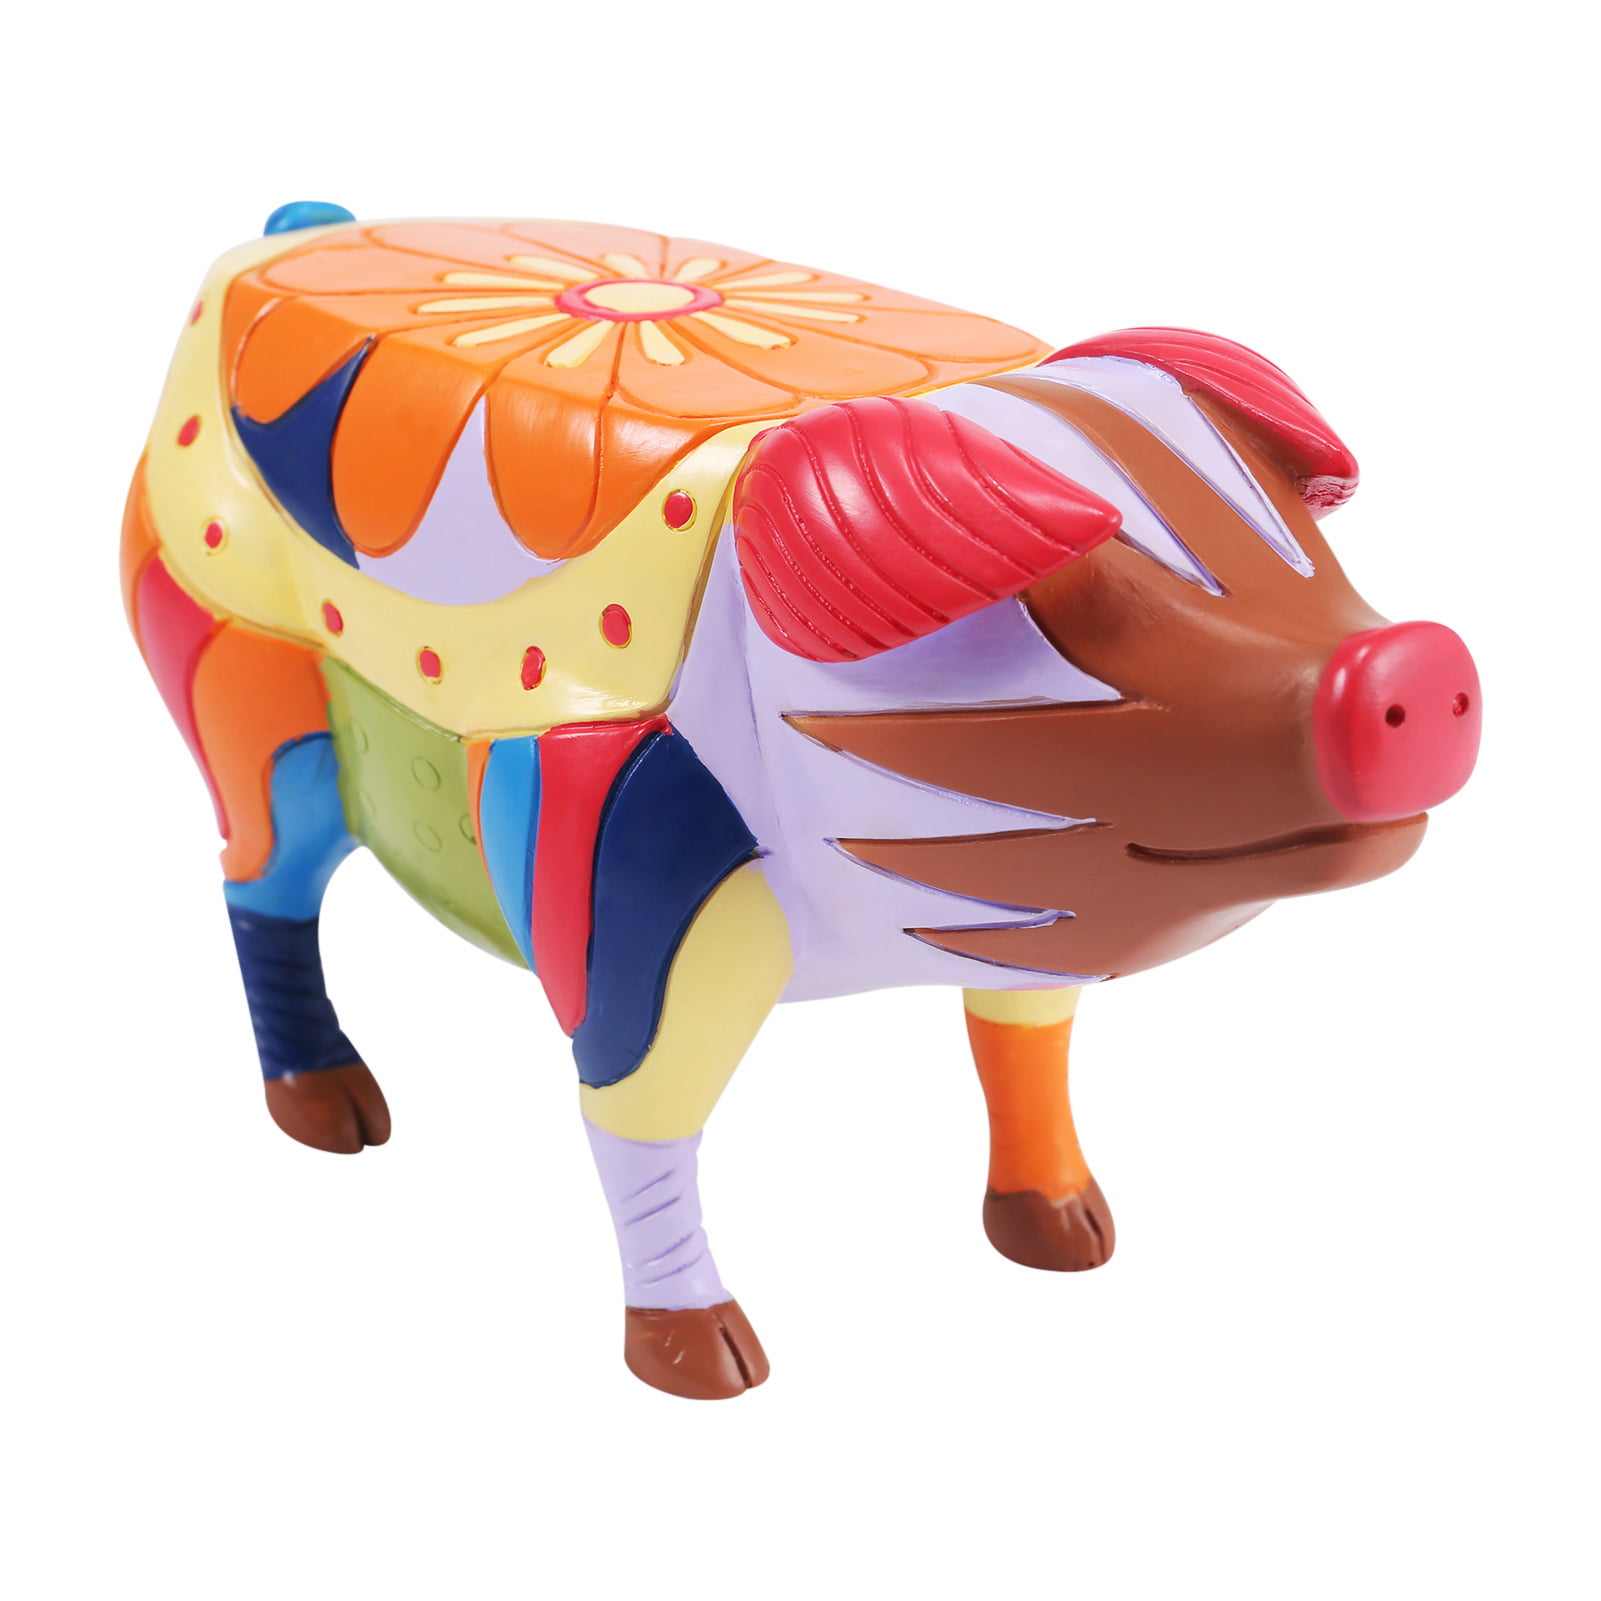 YWYU Folk Art Pig Side Table,Patio Side Table Colorful Folk Art Patio Furniture Animal Resin Statues,Sculptures Crafts for Garden Courtyard Landscape